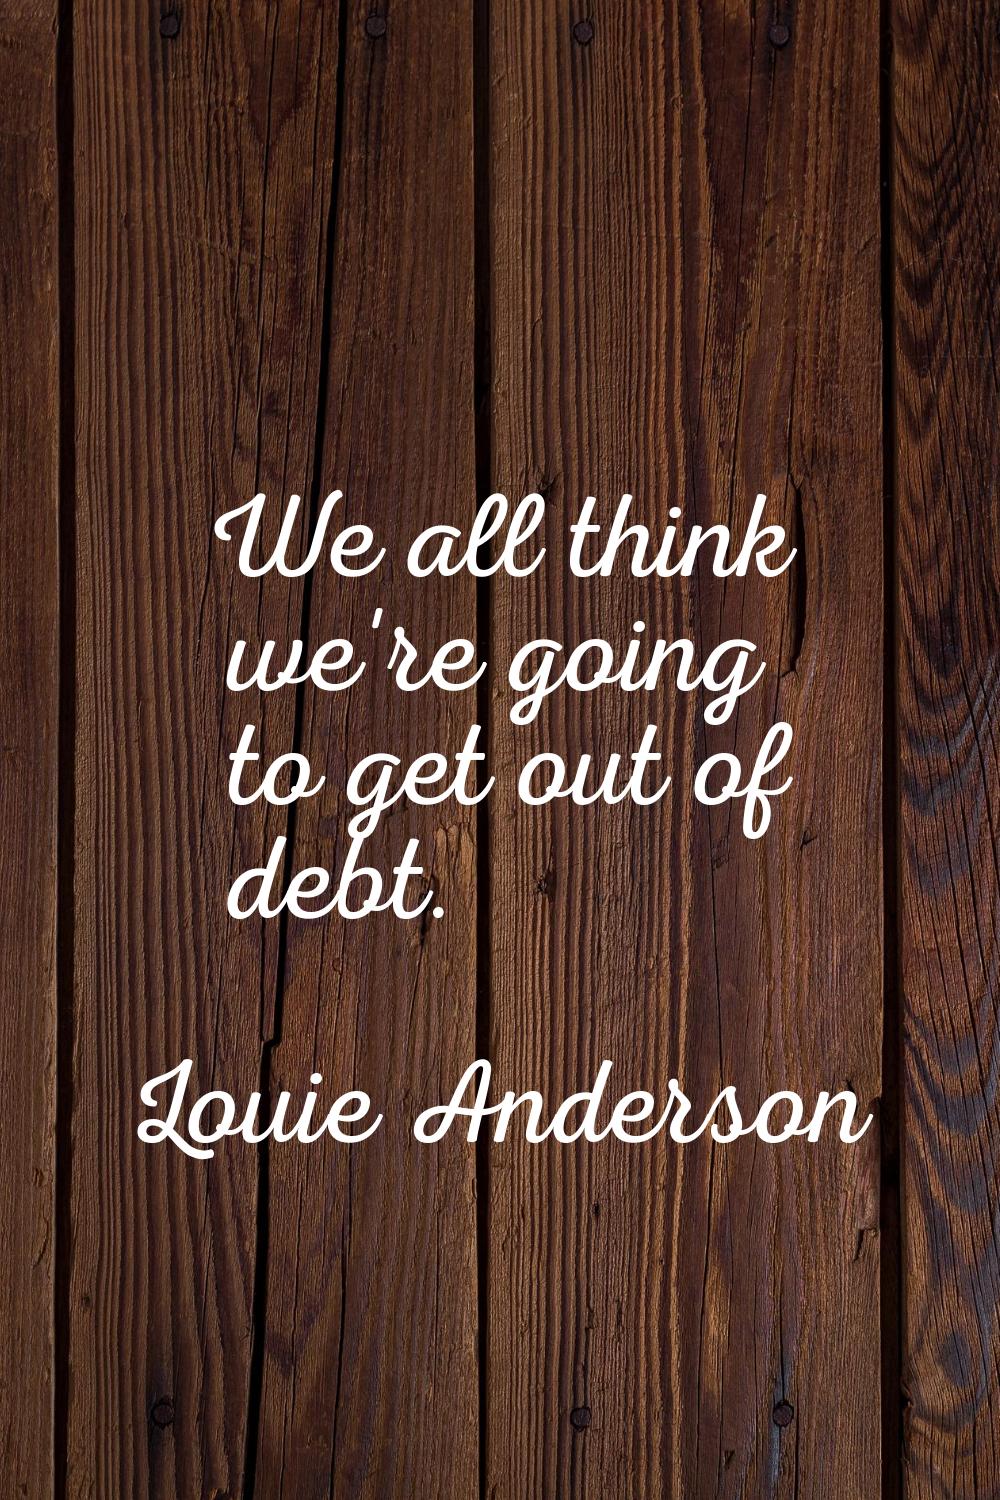 We all think we're going to get out of debt.